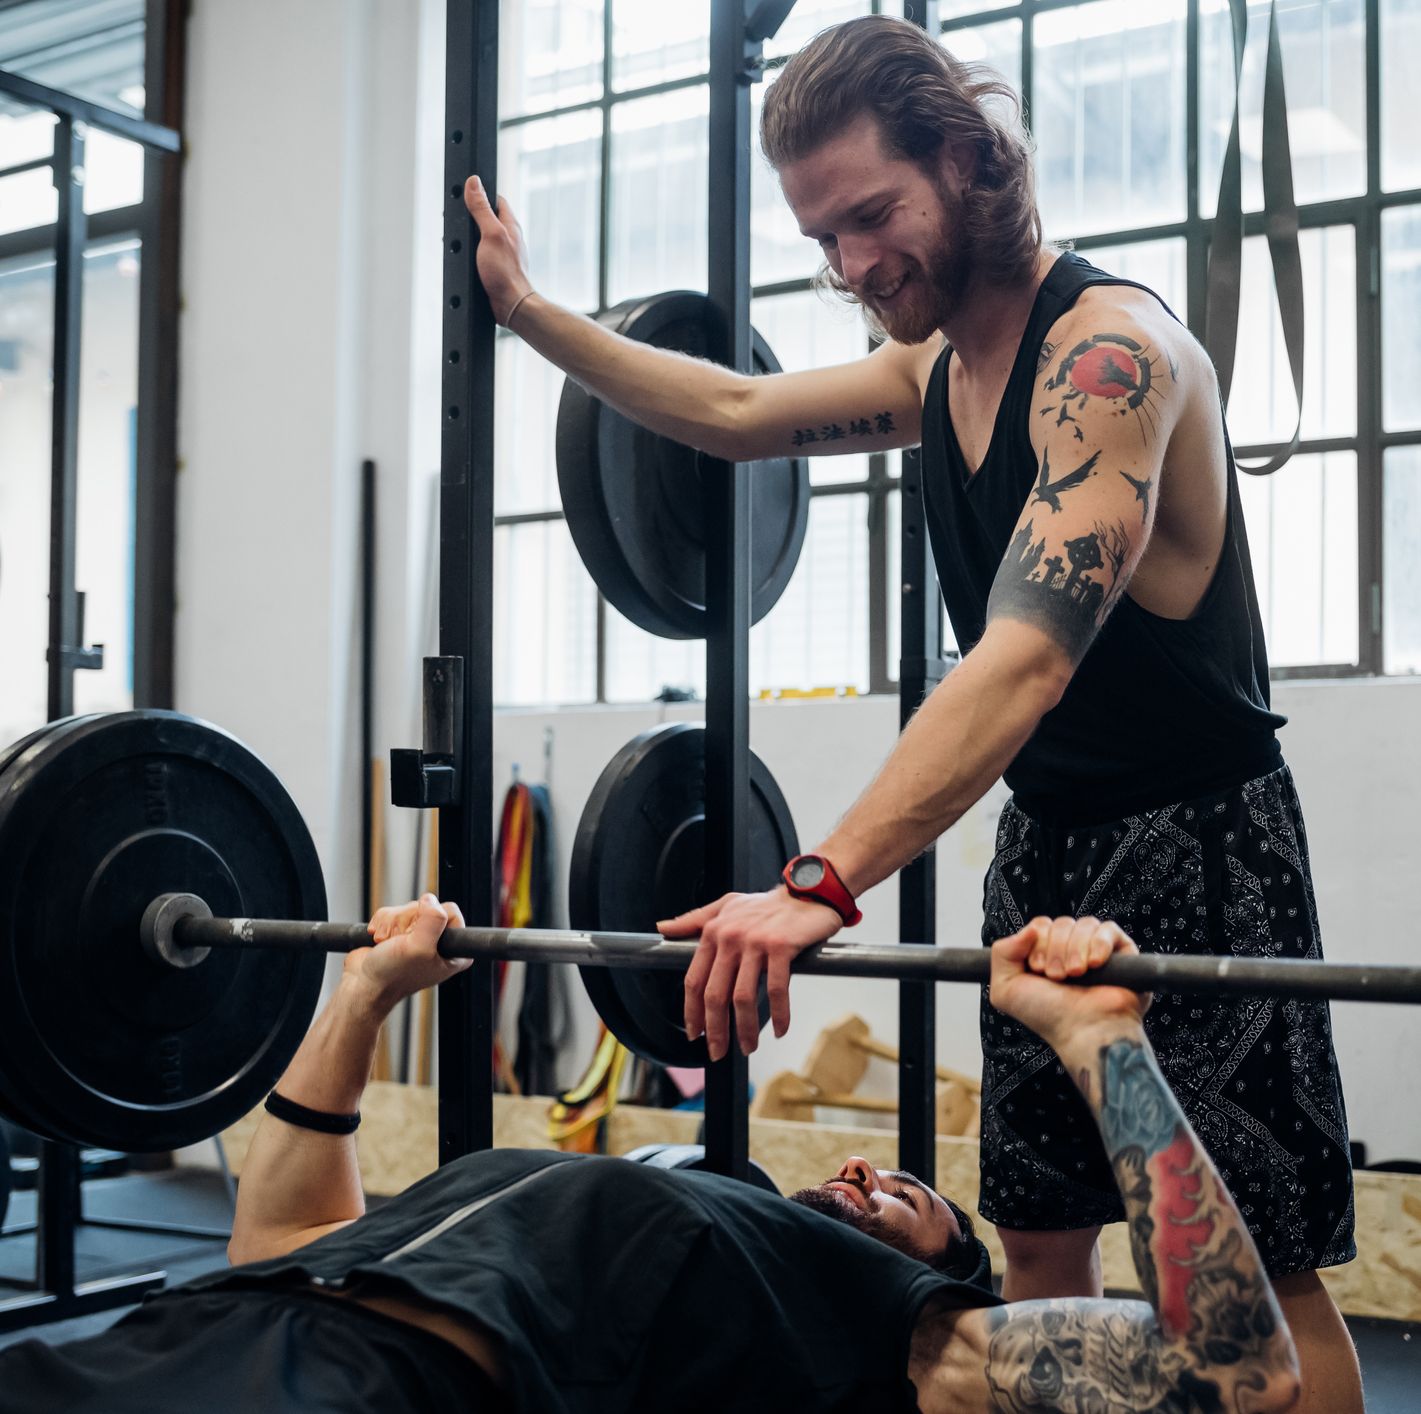 What You Need to Know About Working Out After Getting a Tattoo